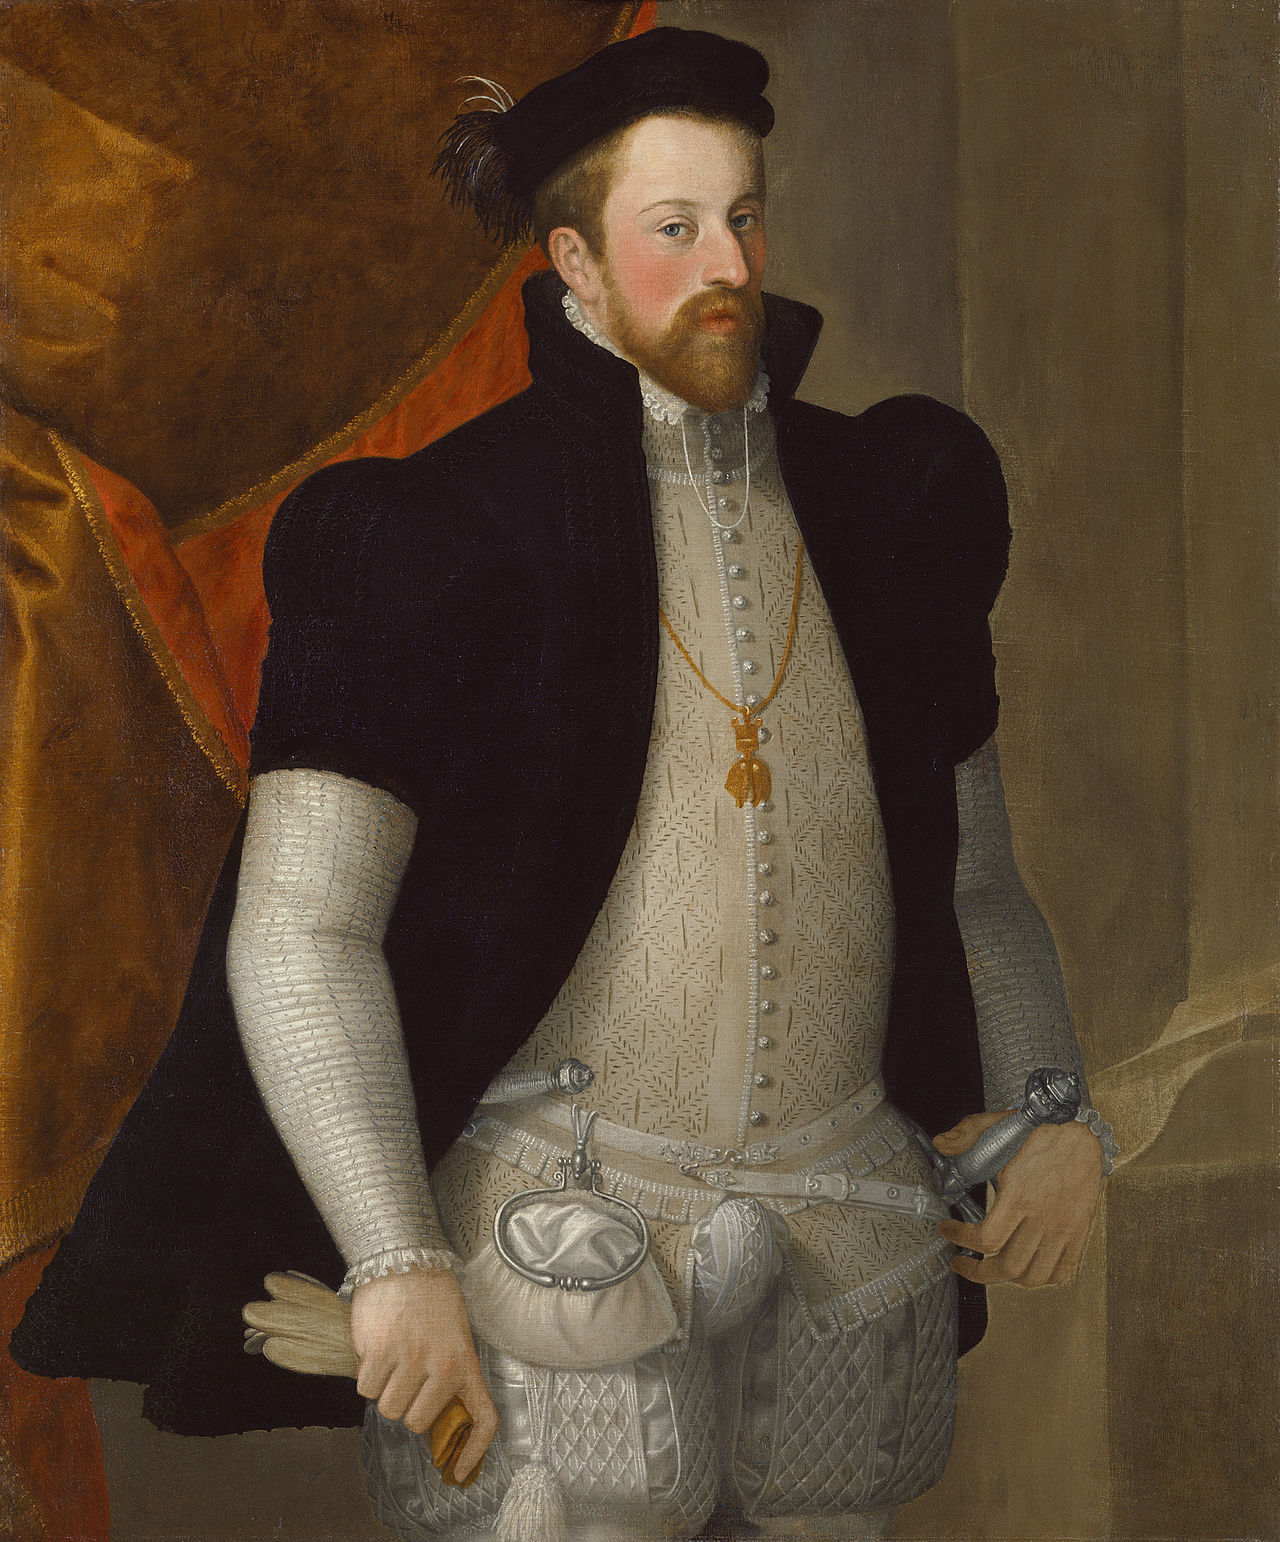 A portrait of Archduke Ferdinand the second of Austria with a pocket tied onto his belt